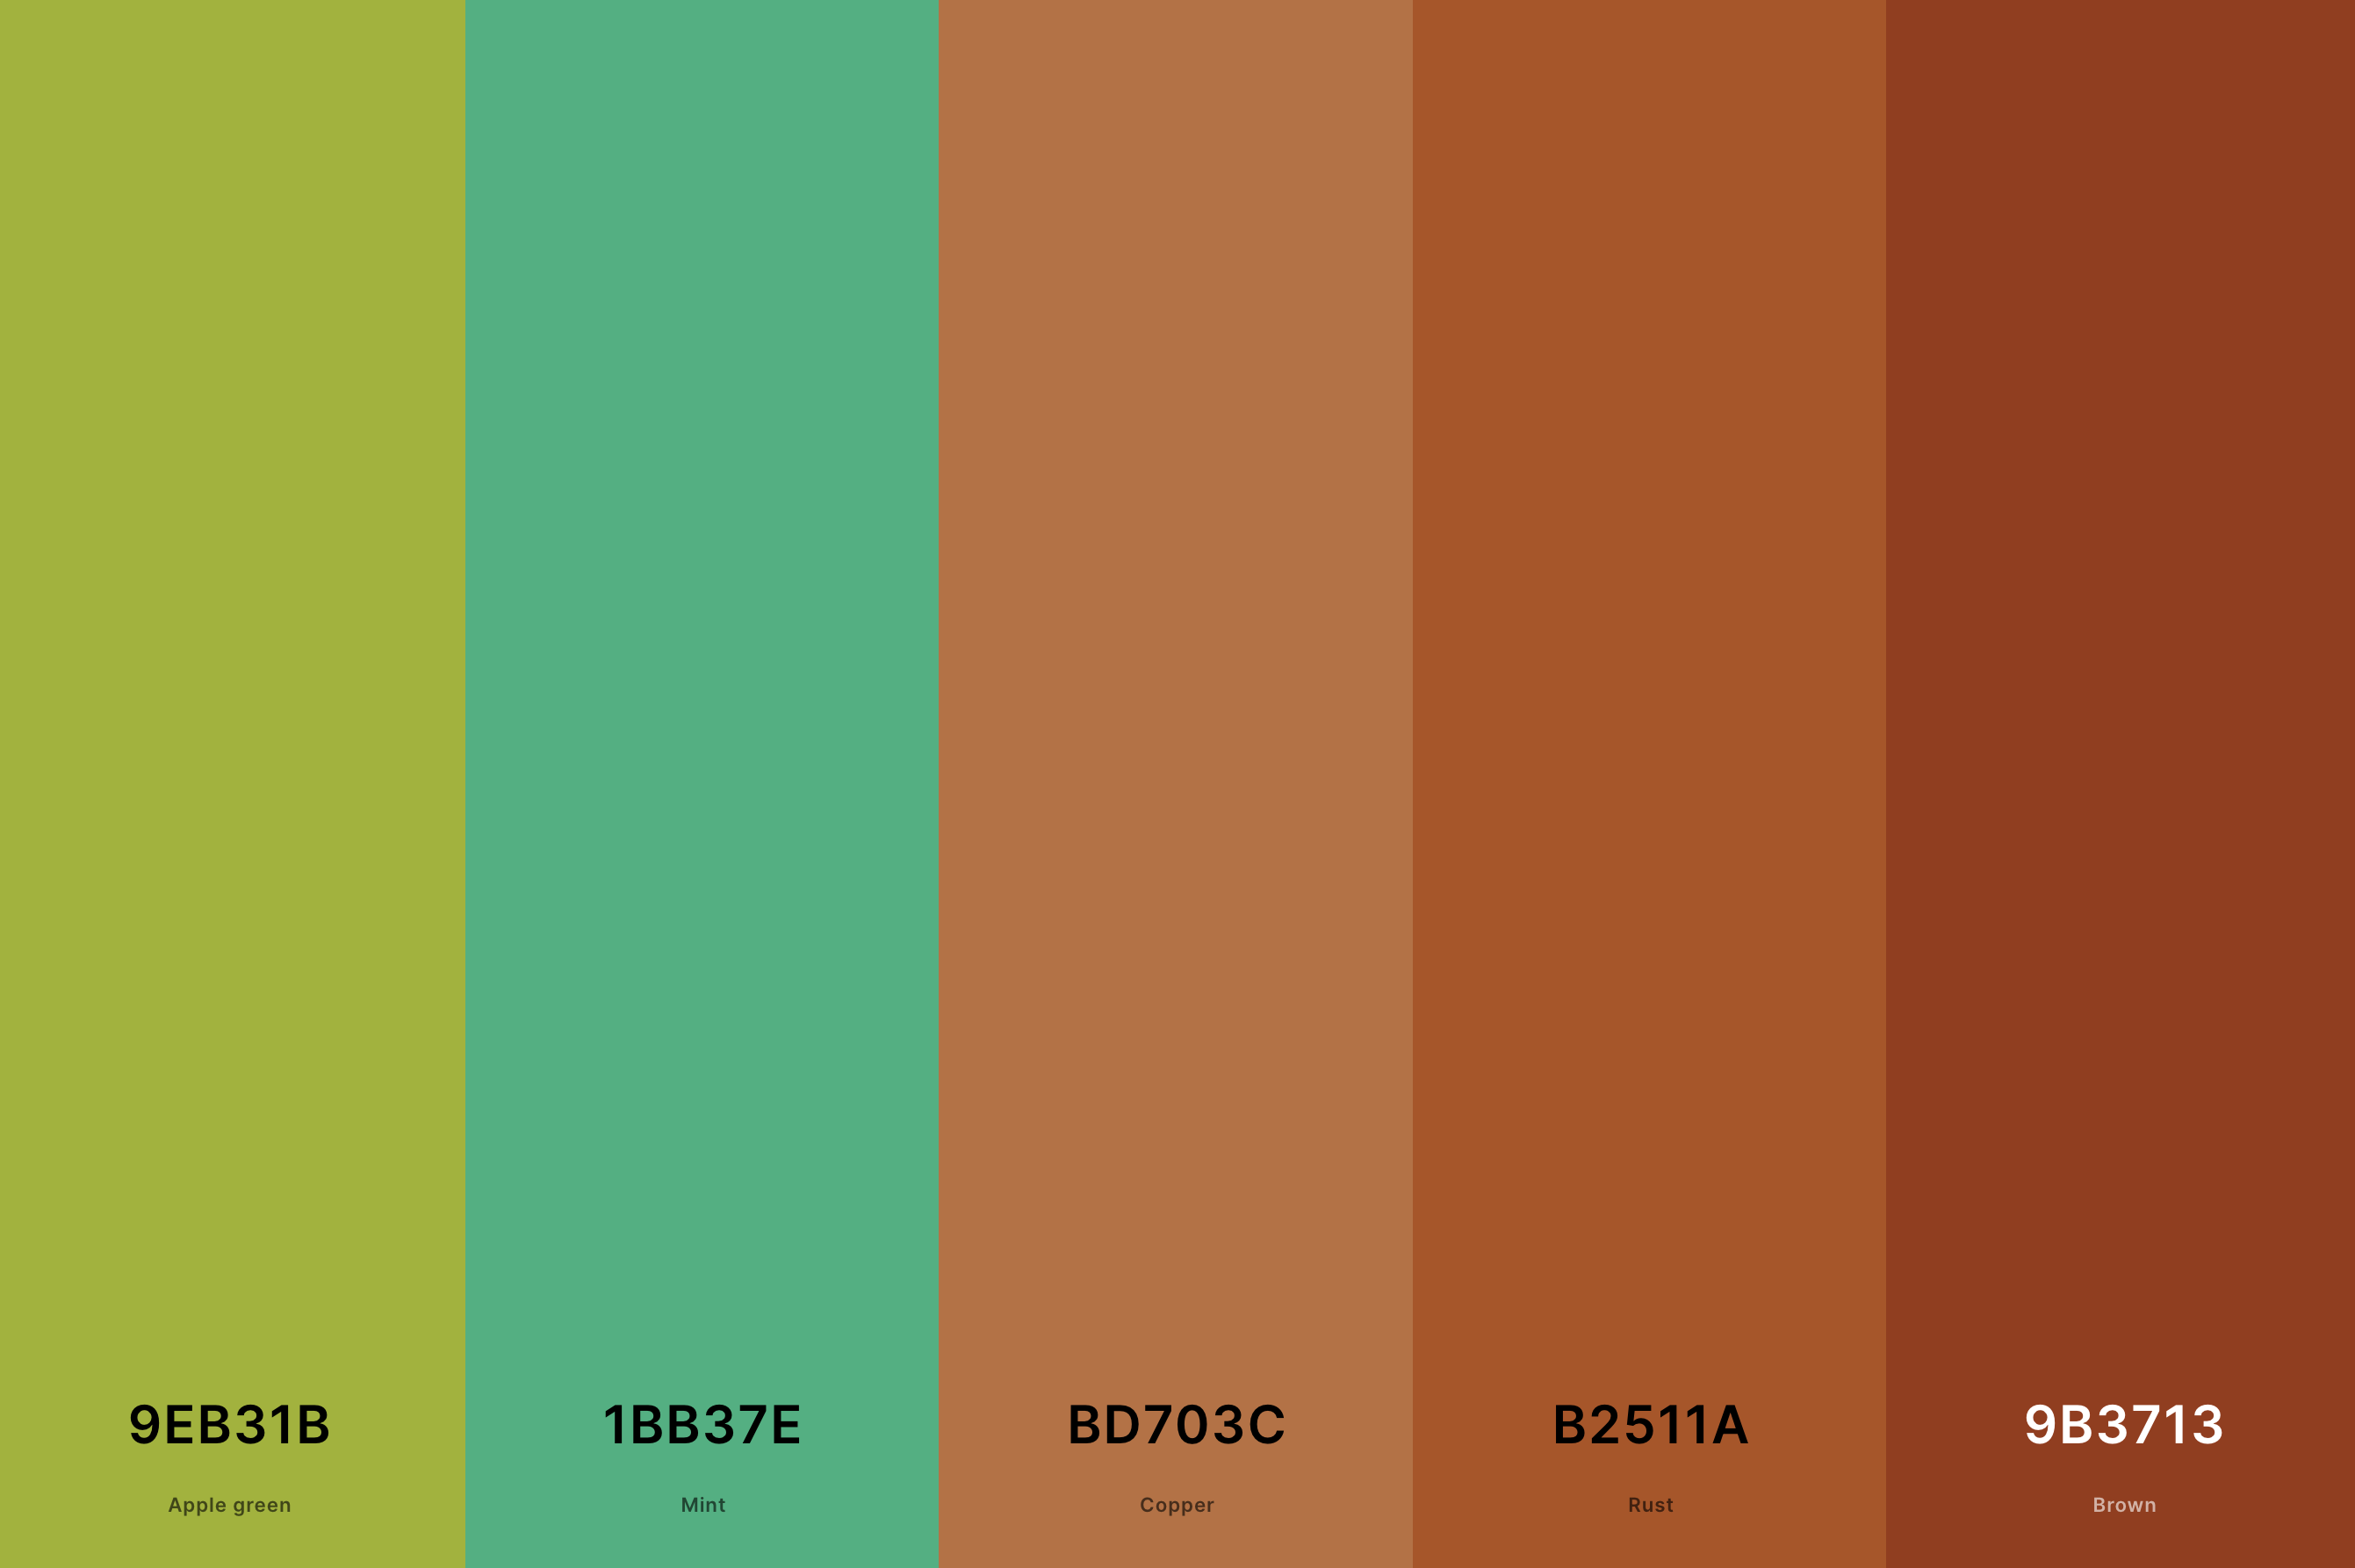 5. Green And Terracotta Color Palette Color Palette with Apple Green (Hex #9EB31B) + Mint (Hex #1BB37E) + Copper (Hex #BD703C) + Rust (Hex #B2511A) + Brown (Hex #9B3713) Color Palette with Hex Codes